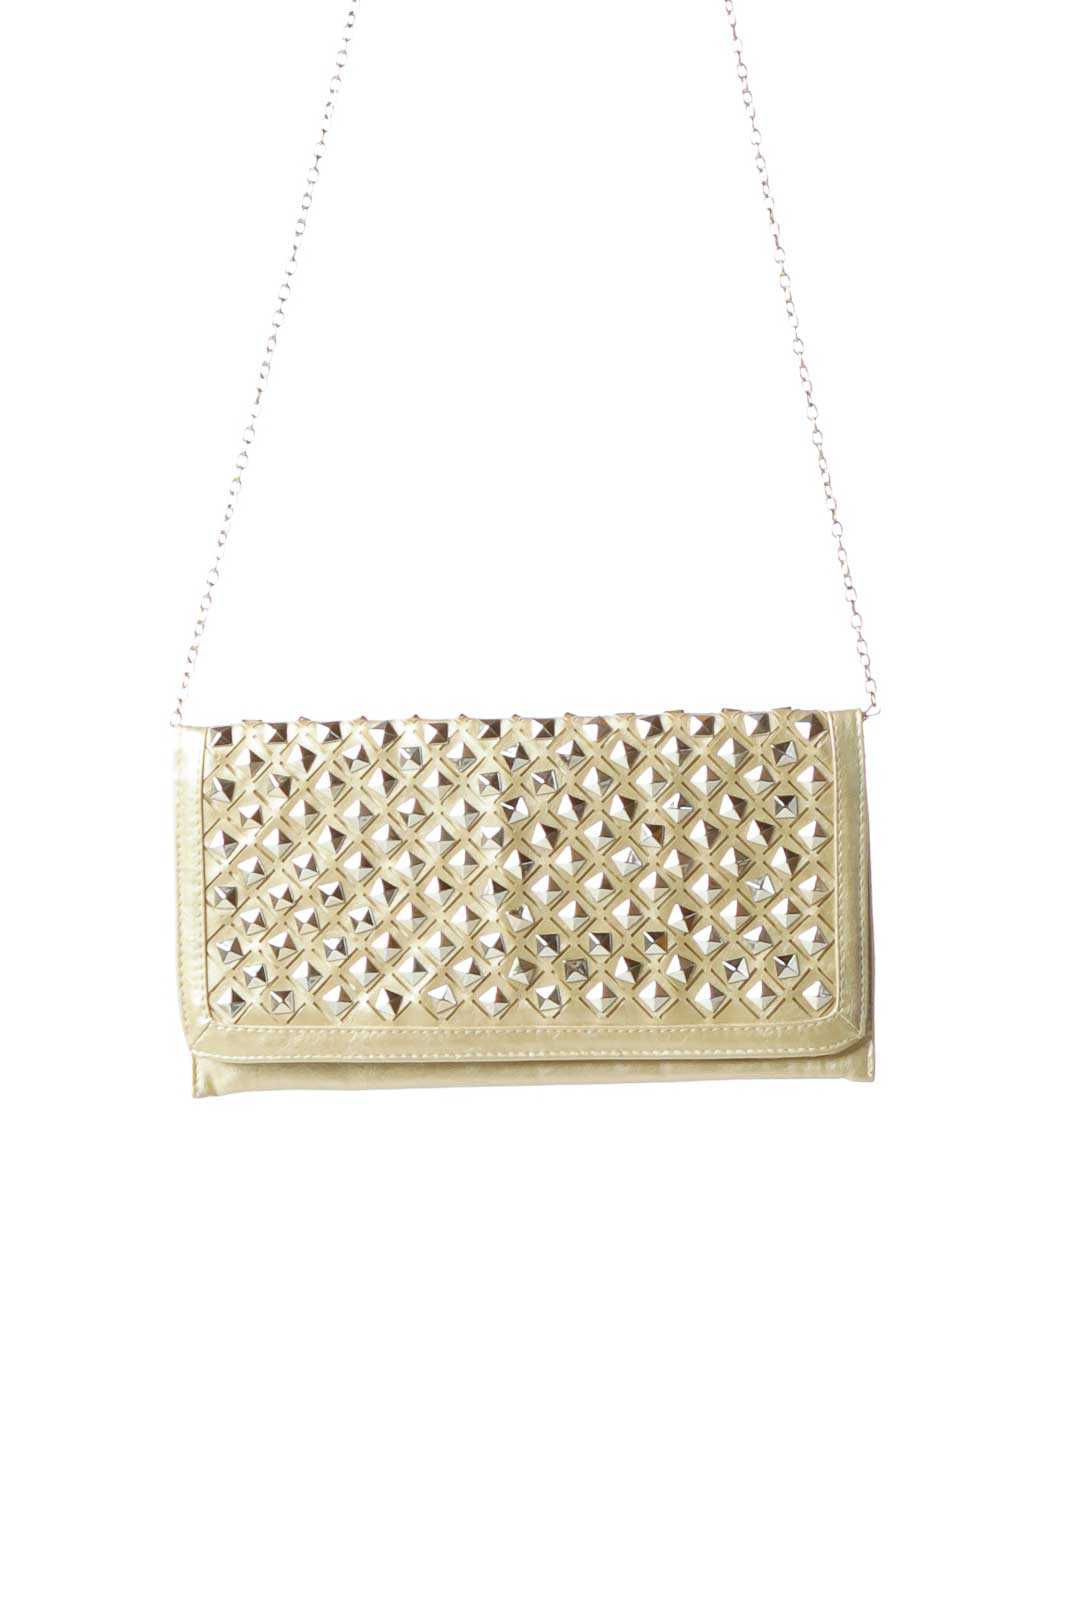 Gold Studded Clutch Front